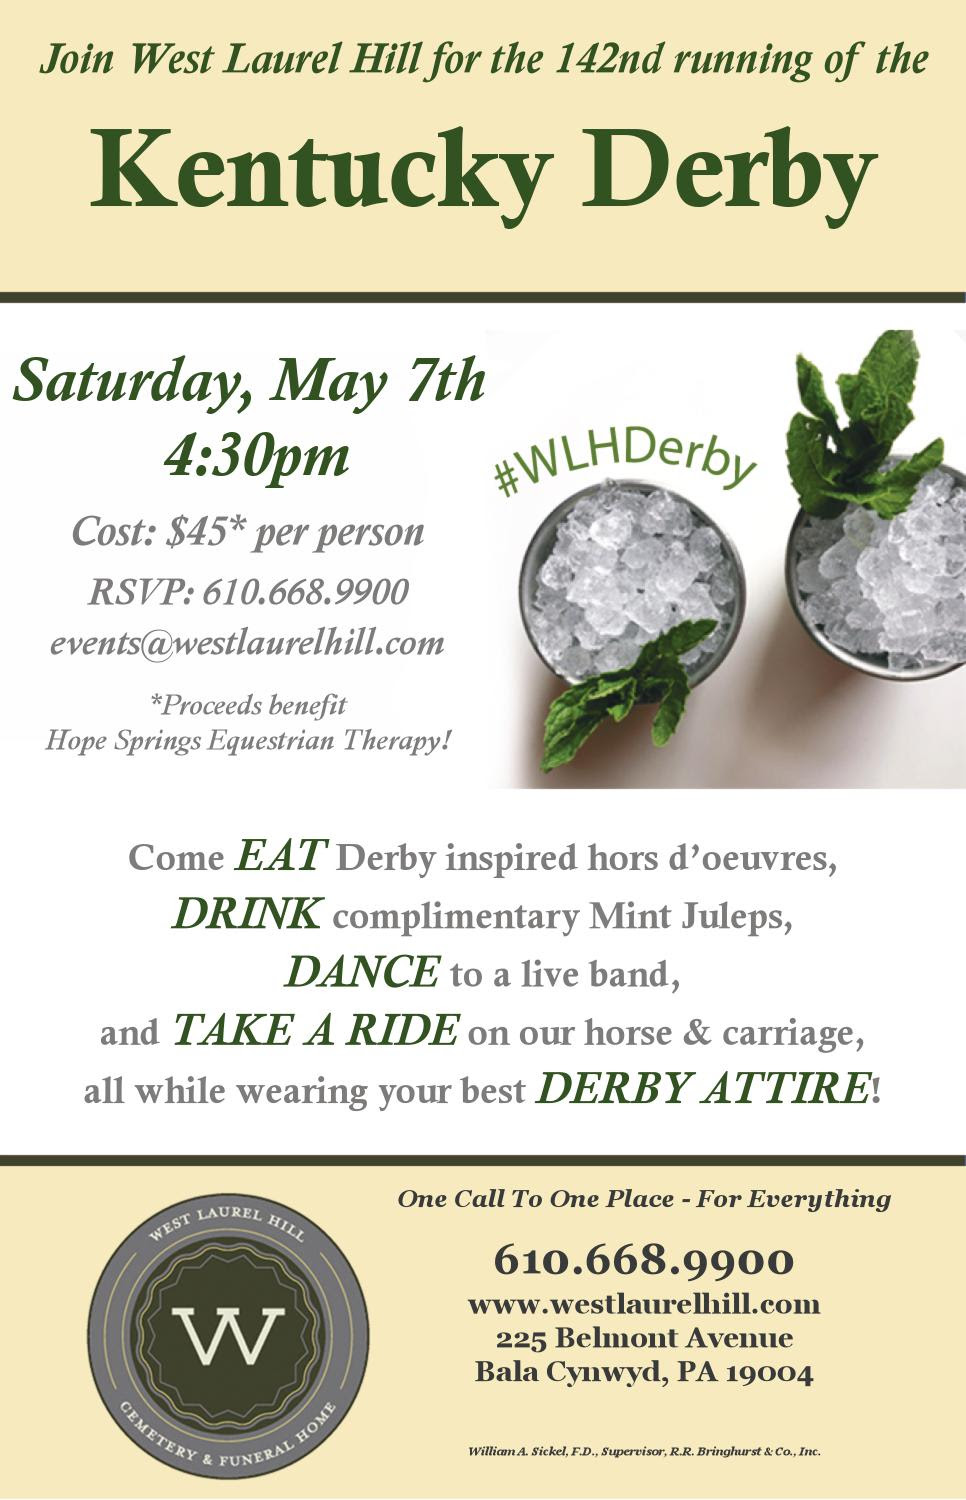 Join me for a Kentucky Derby Party! #WLHDerby